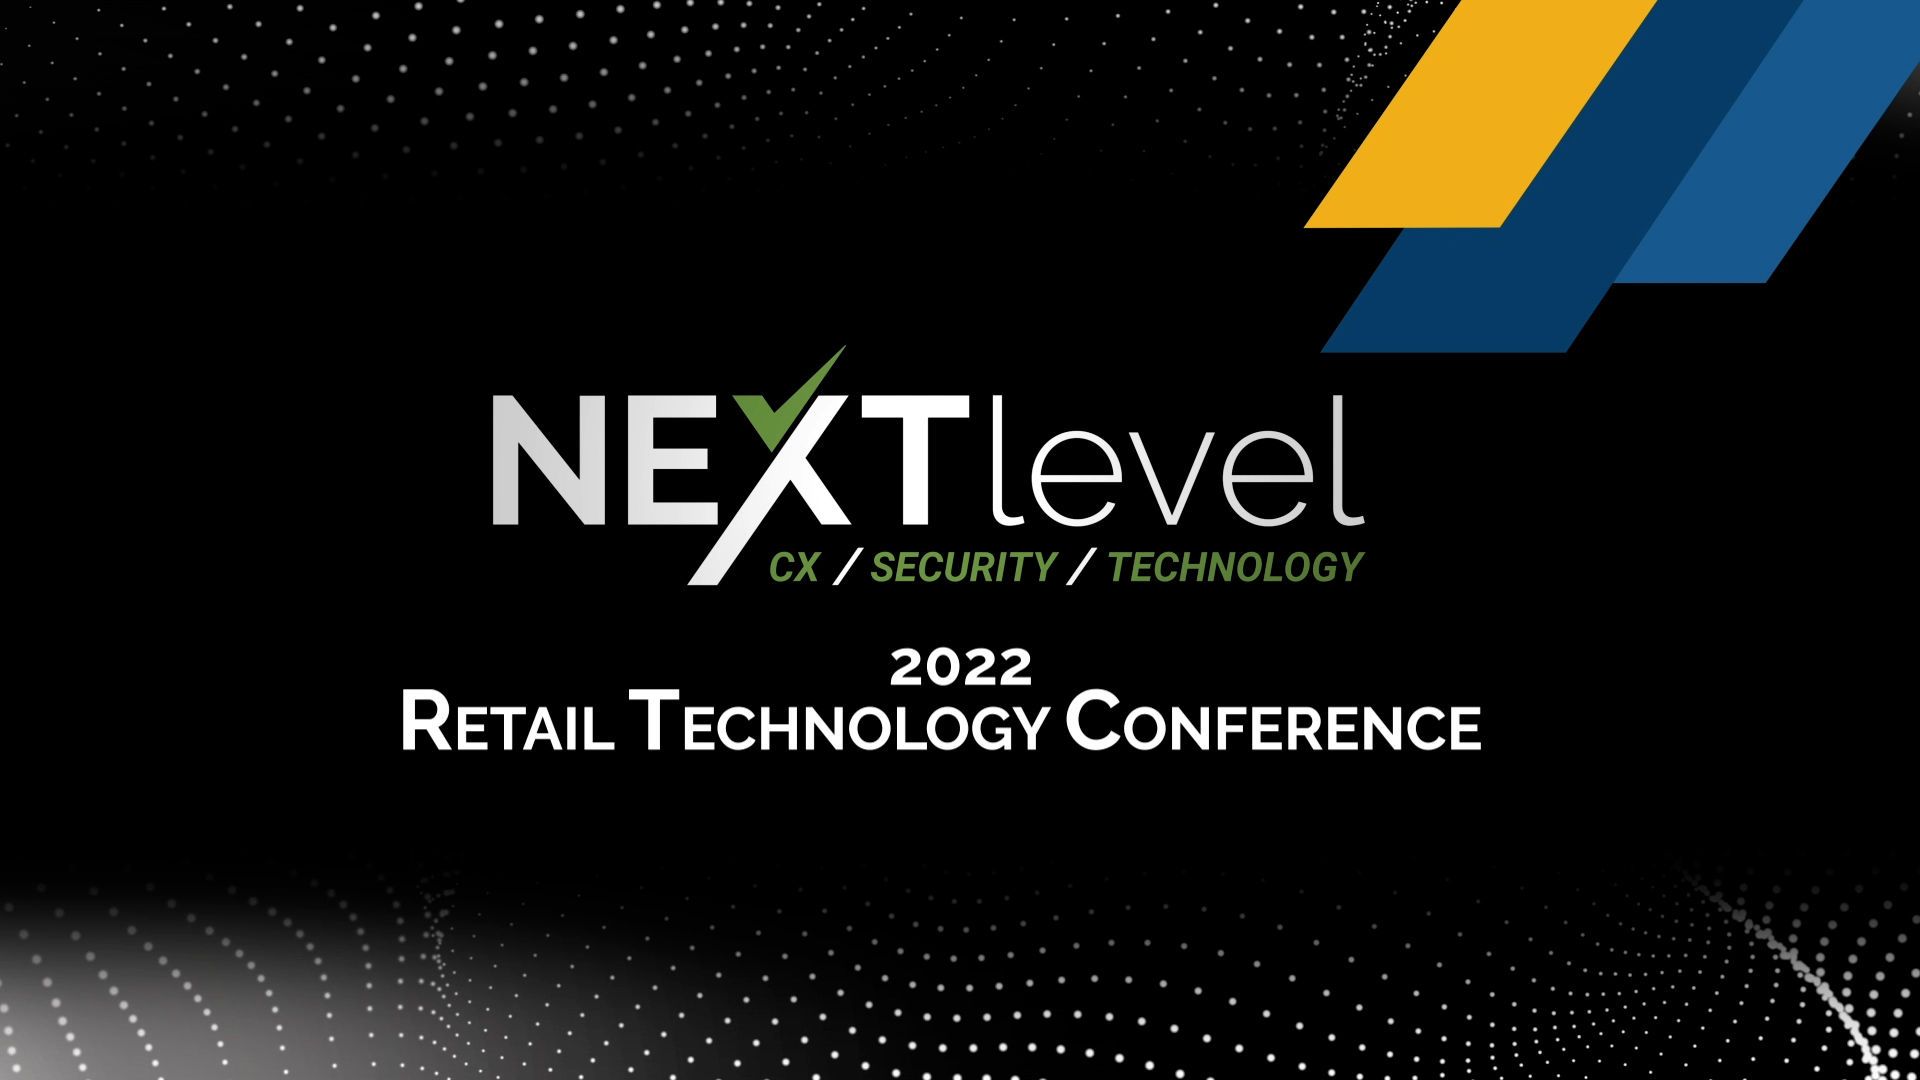 Retail Technology Conference